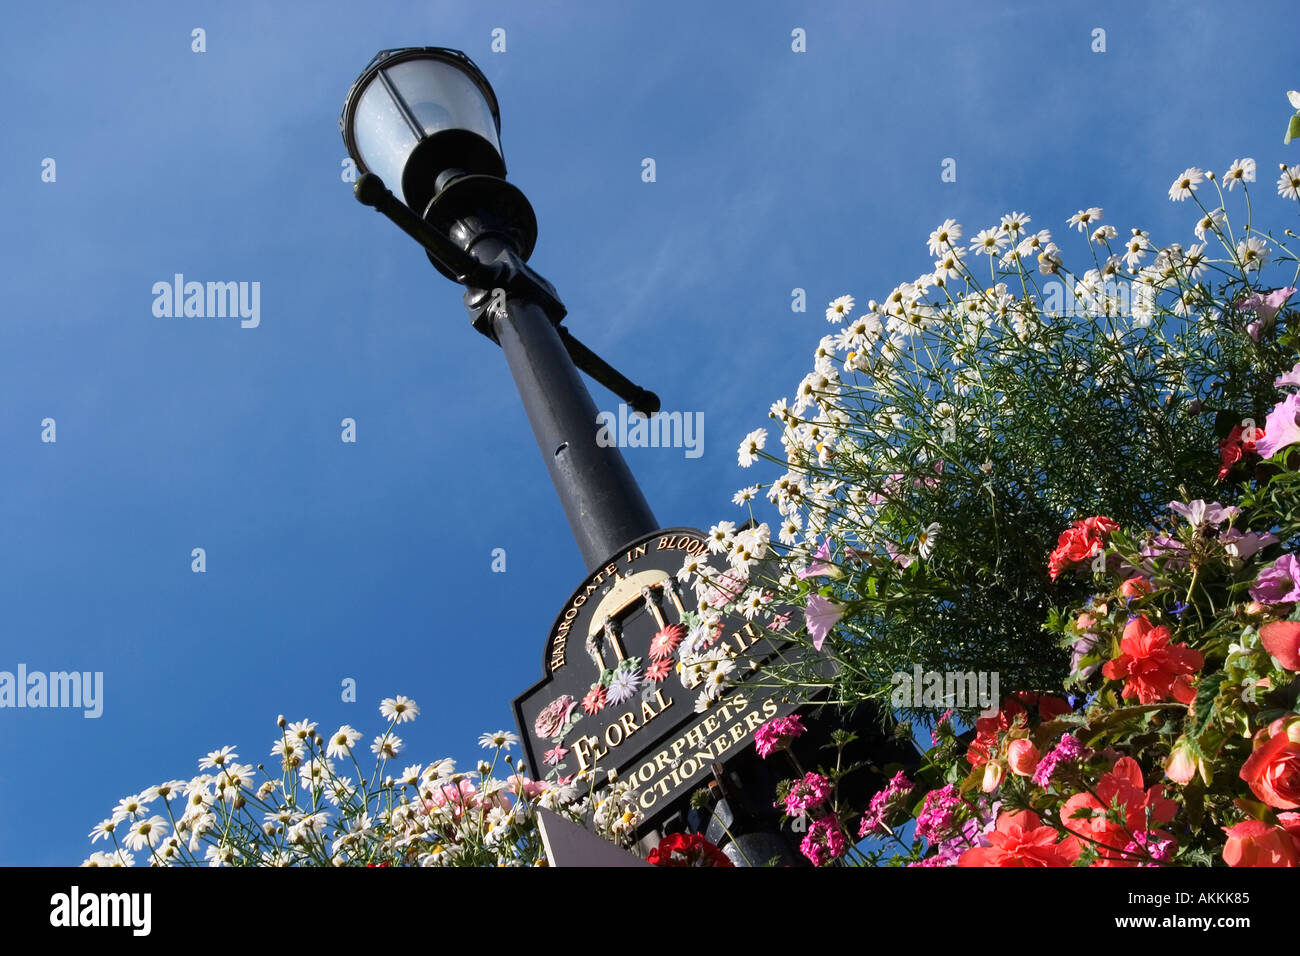 Harrogate in Bloom Floral Trail Flower Displays on a Lamppost in the Montpellier Quarter North Yorkshire England Stock Photo